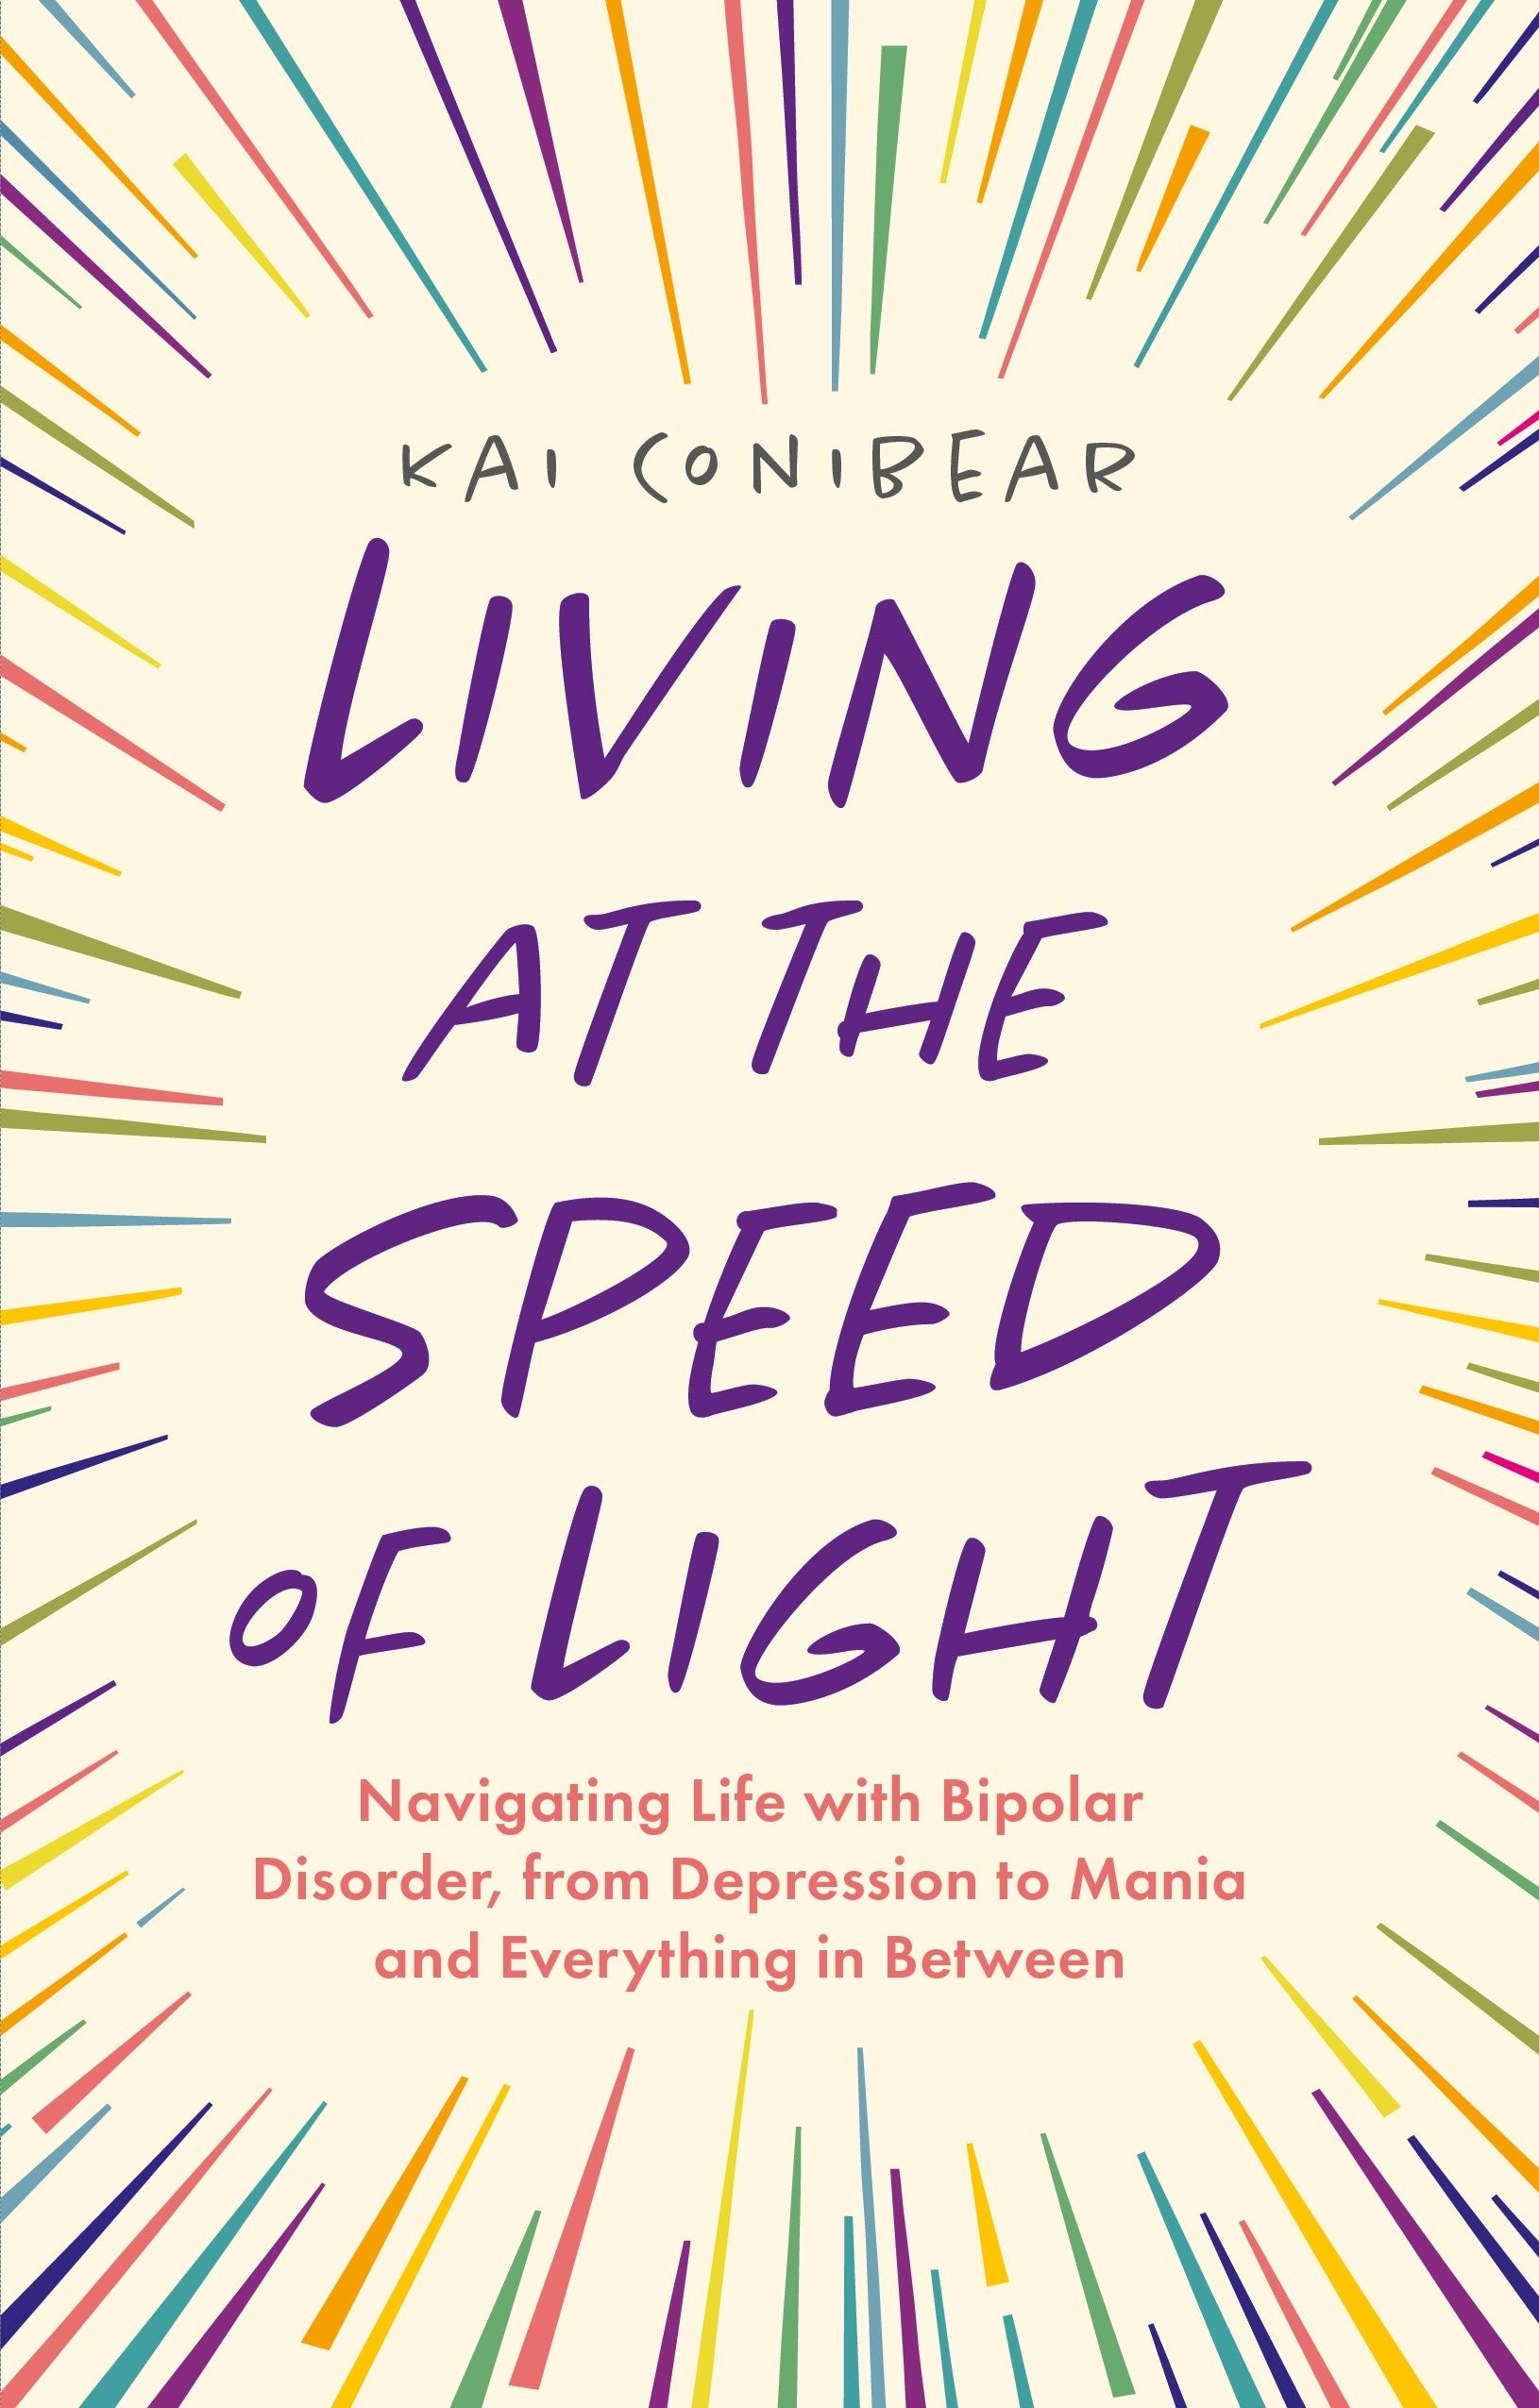 Living at the Speed of Light by Kai Conibear